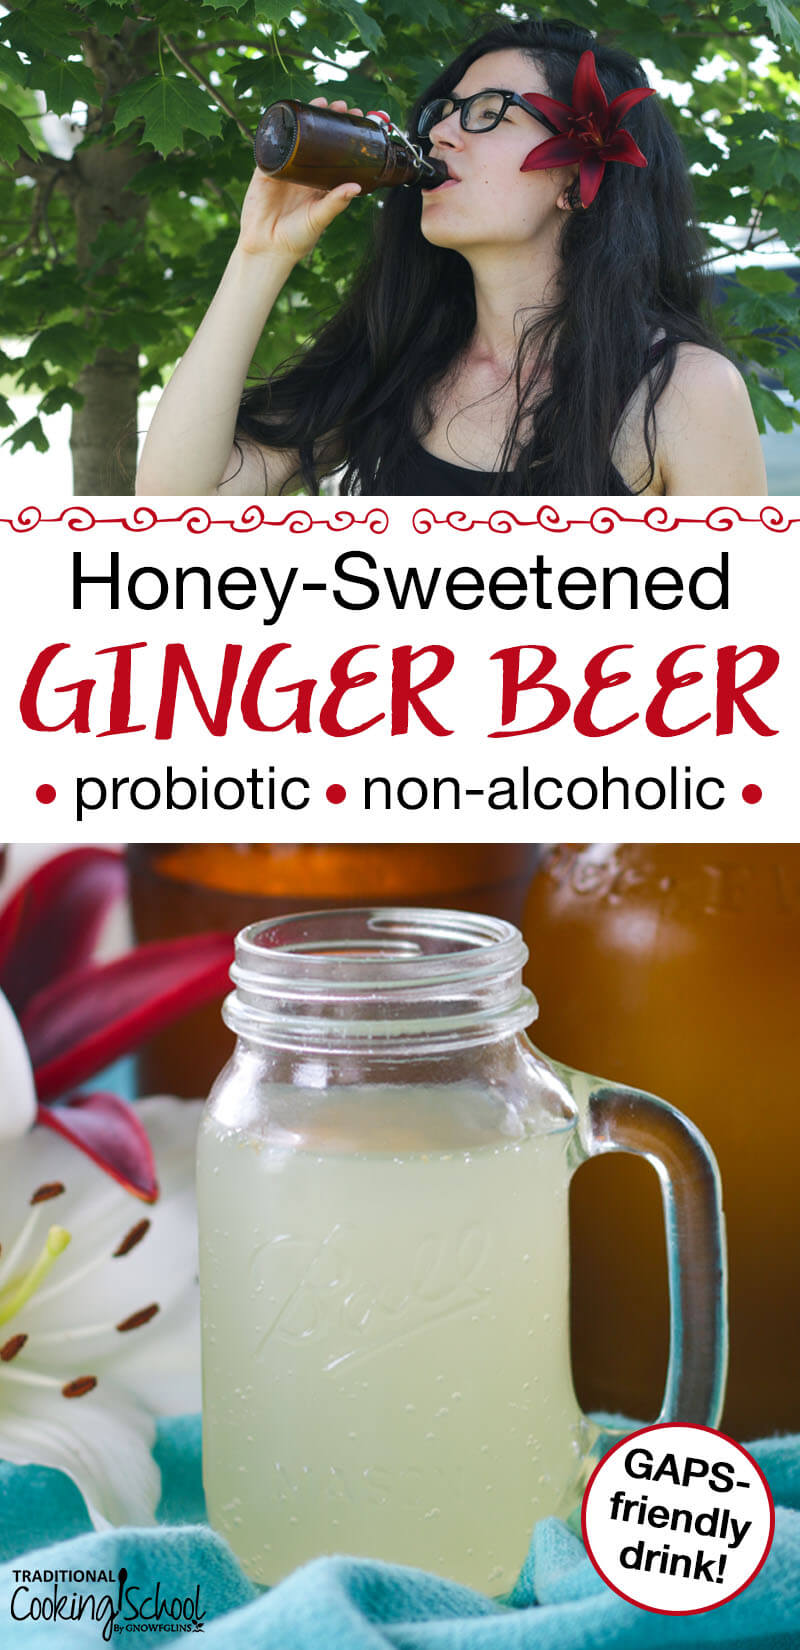 honey-sweetened ginger beer being drunk by dark-haired woman